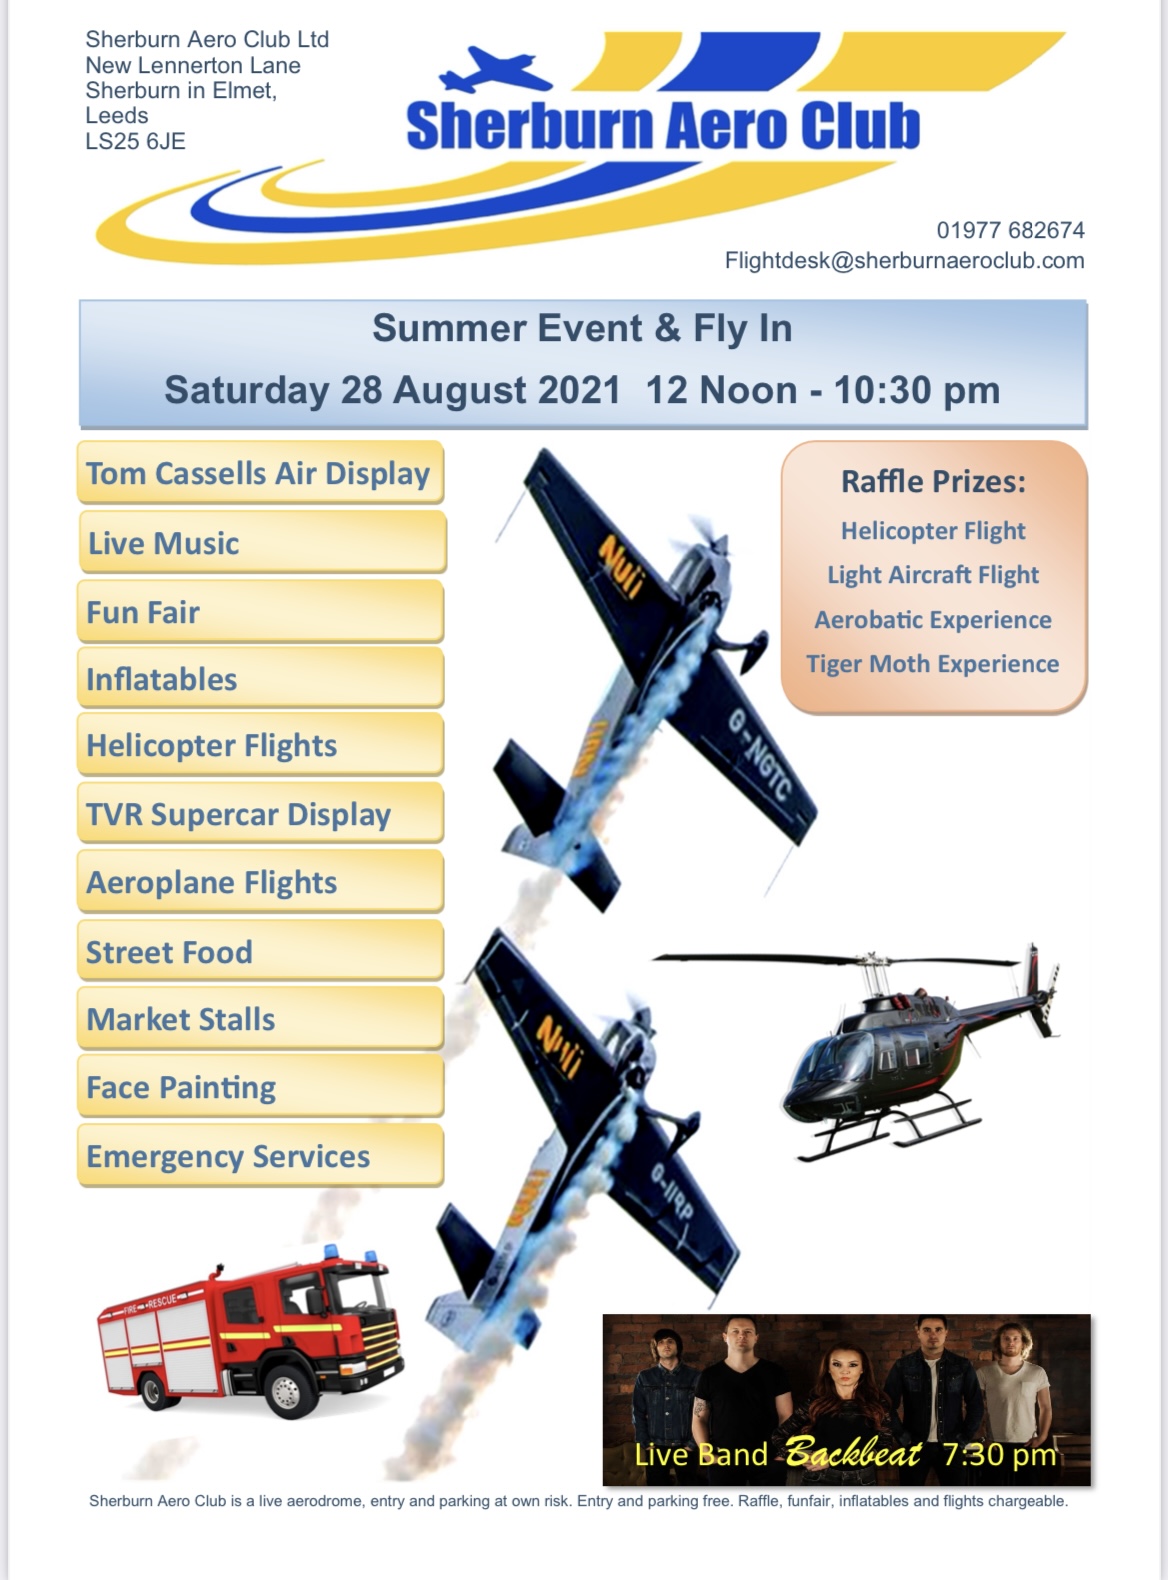 Free Landing fees, Vintage aircraft and TVR supercars, BBQ, live music, raffle prizes, a huge welcome to all visiting aircraft and pilots and much much more.